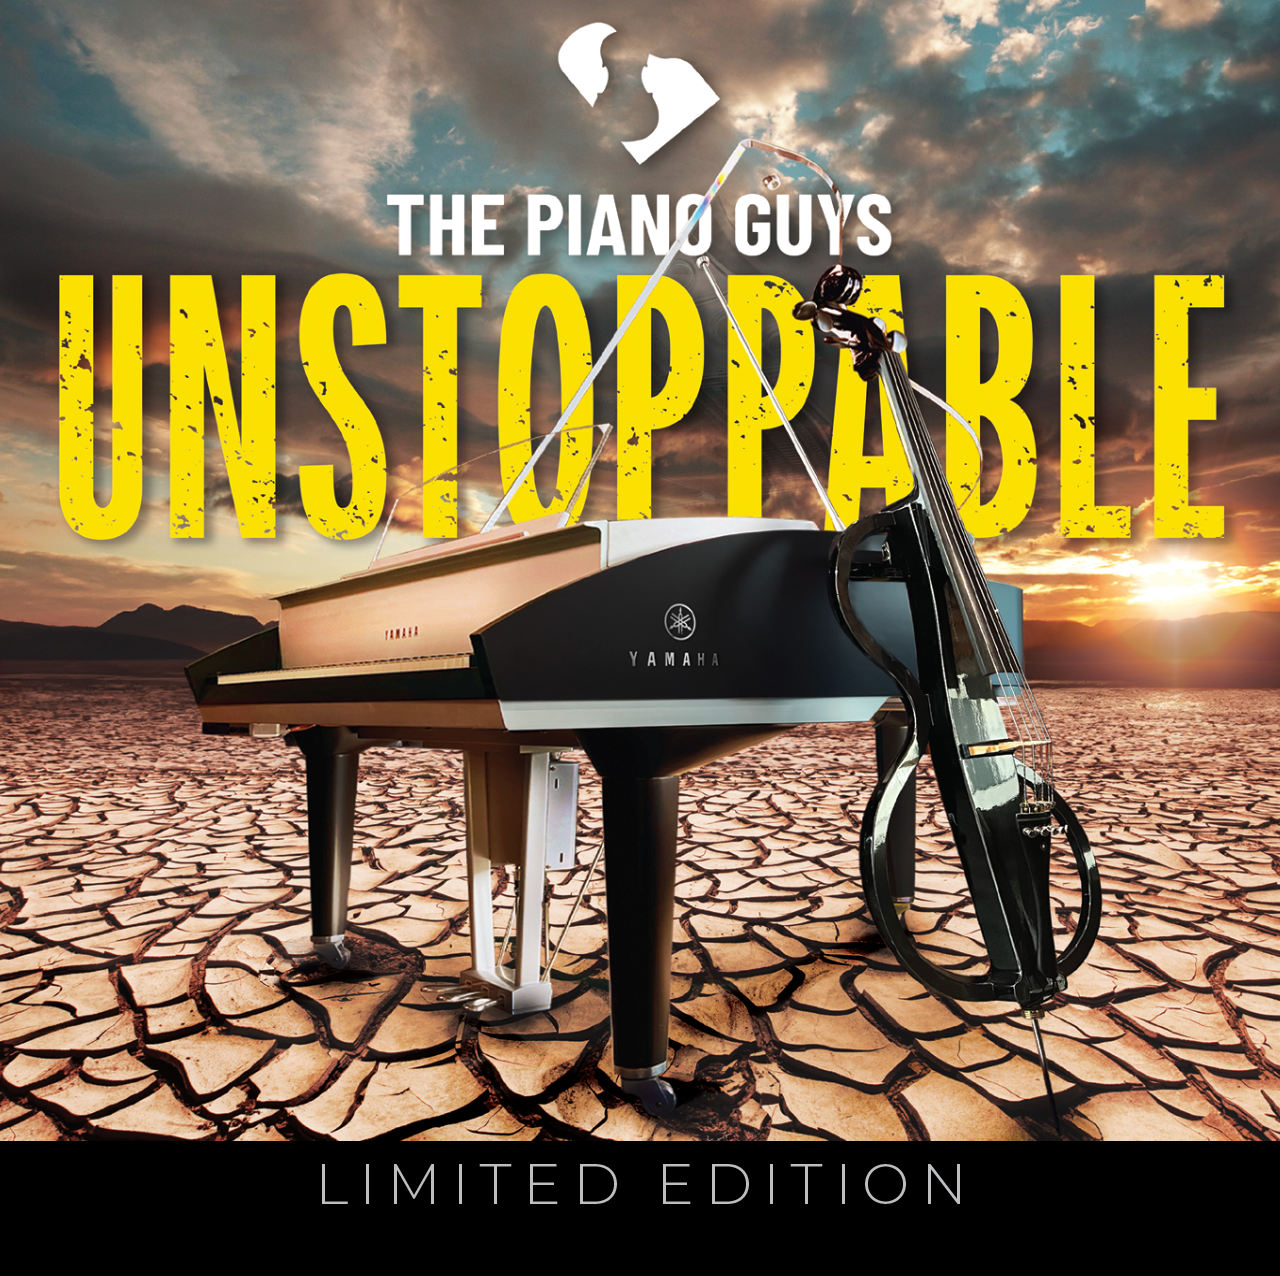 The Piano Guys "Unstoppable"